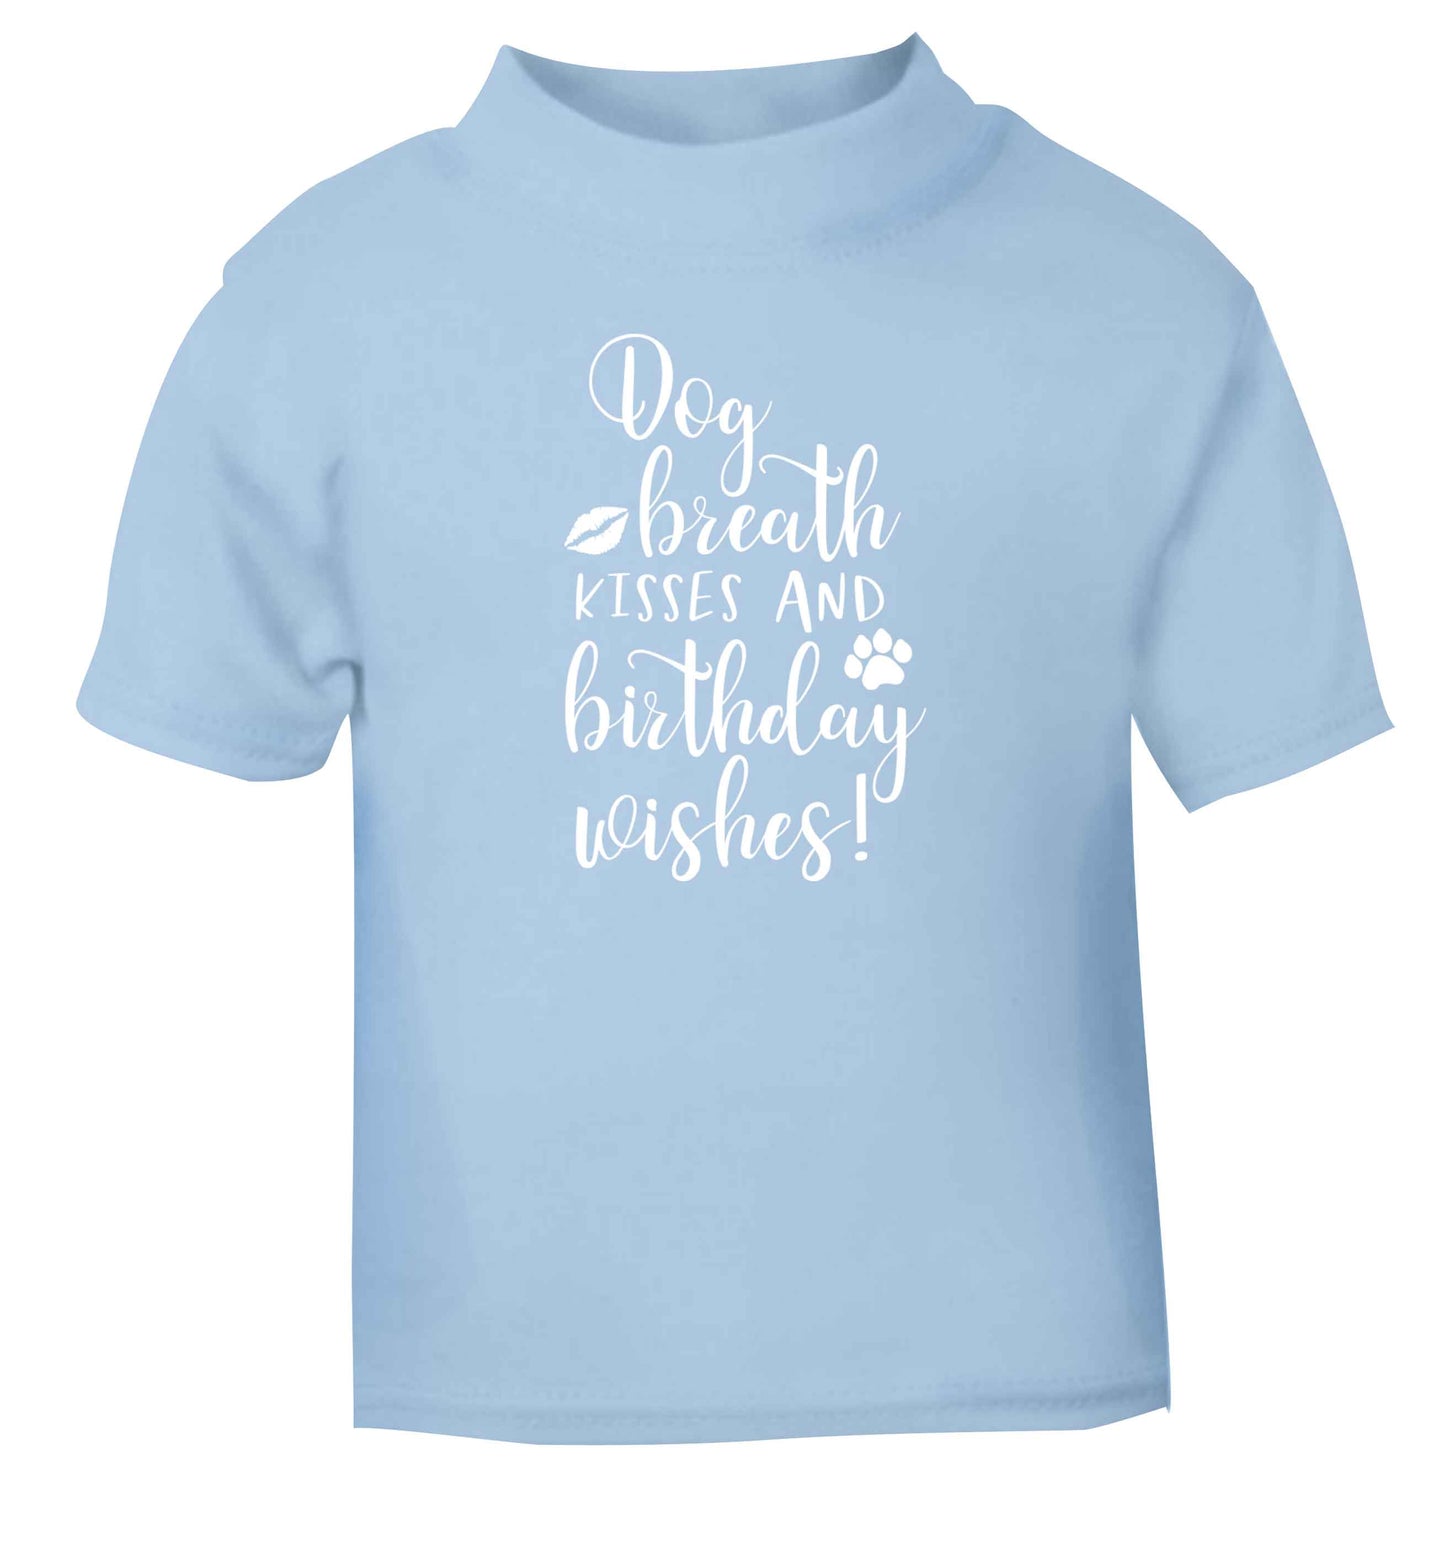 Dog breath kisses and christmas wishes light blue Baby Toddler Tshirt 2 Years